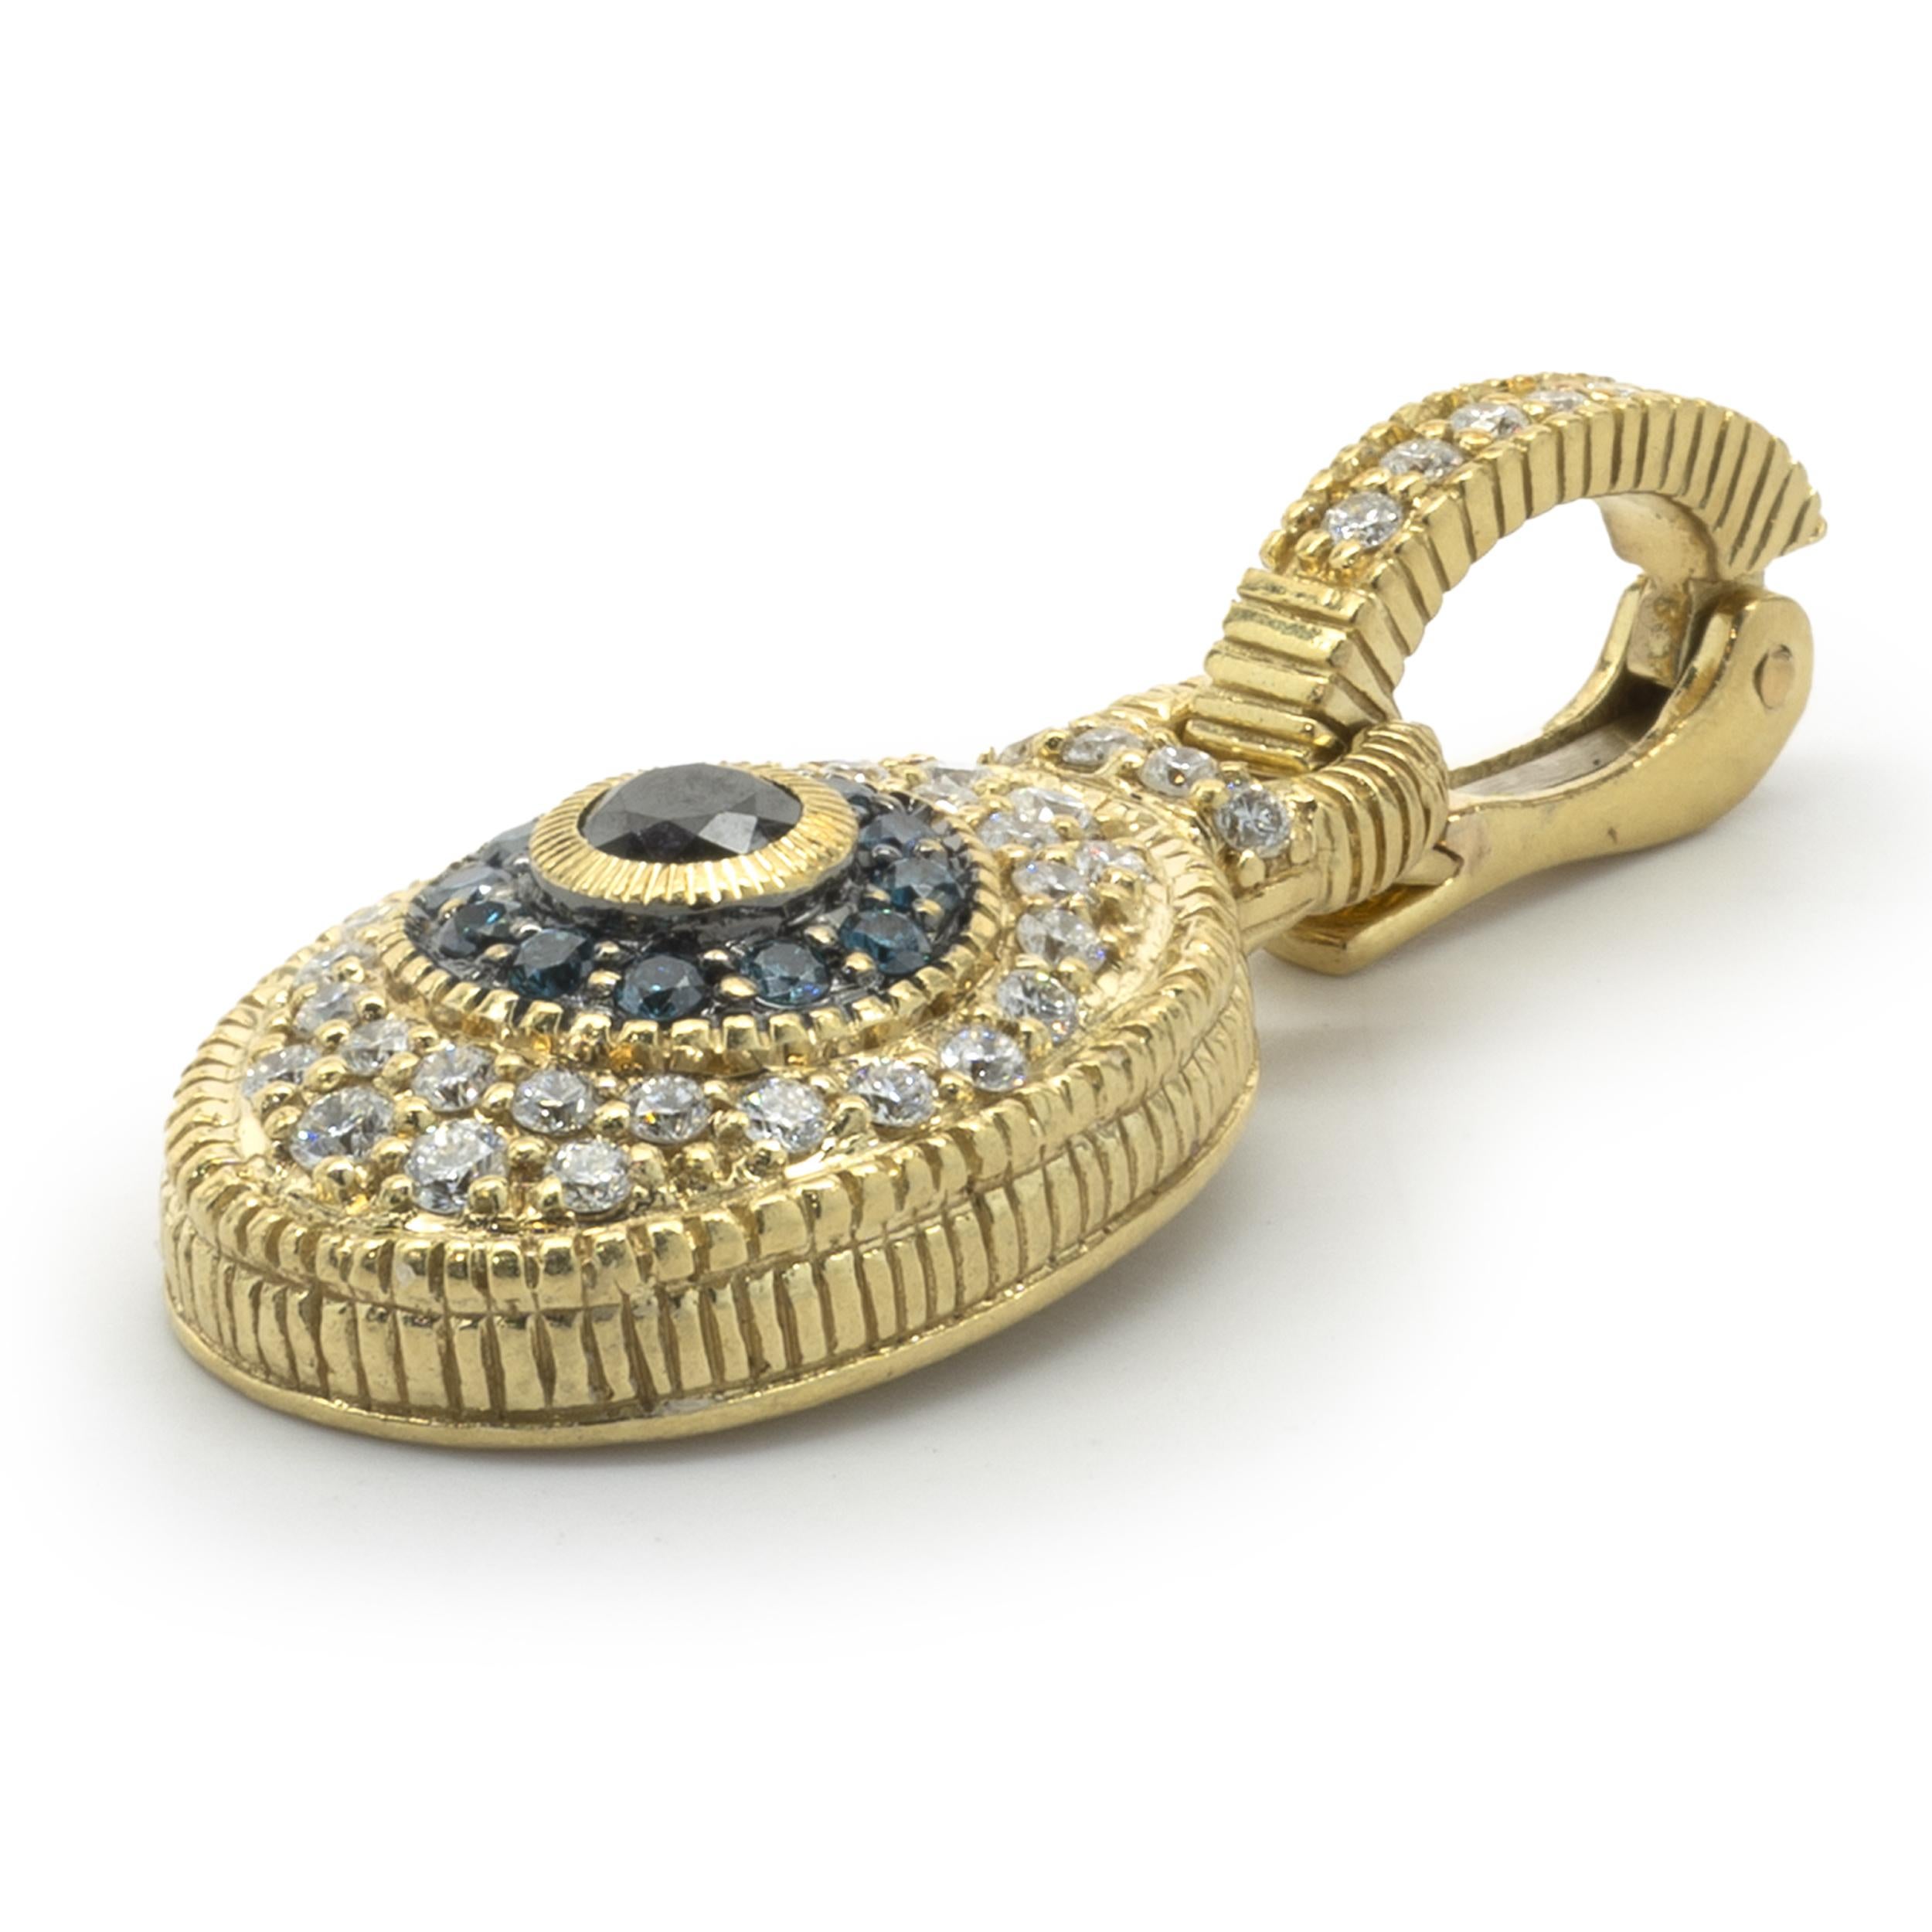 Designer: Judith Ripka
Material: 18K yellow gold
Diamond:  round brilliant cut = 1.20cttw
Color: Black / Blue / G 
Clarity: SI1
Dimensions: pendant measures 31 X 12.50mm
Weight: 4.71 grams
